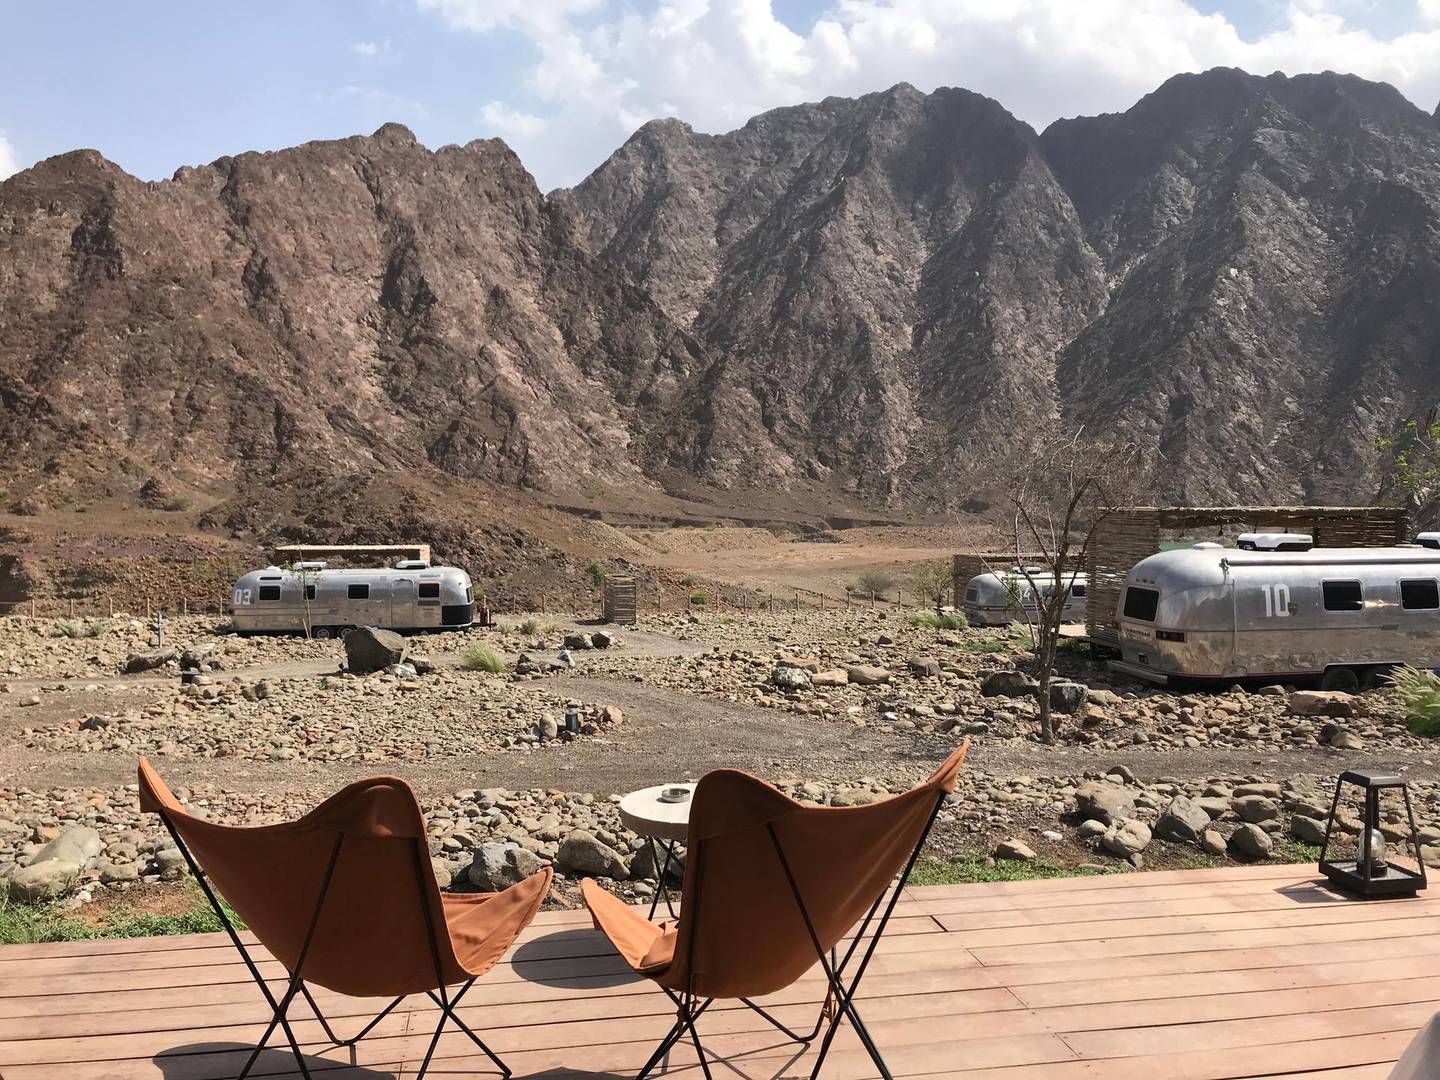 Hatta Sedr Trailers each have their own decking area for mountainside lounging